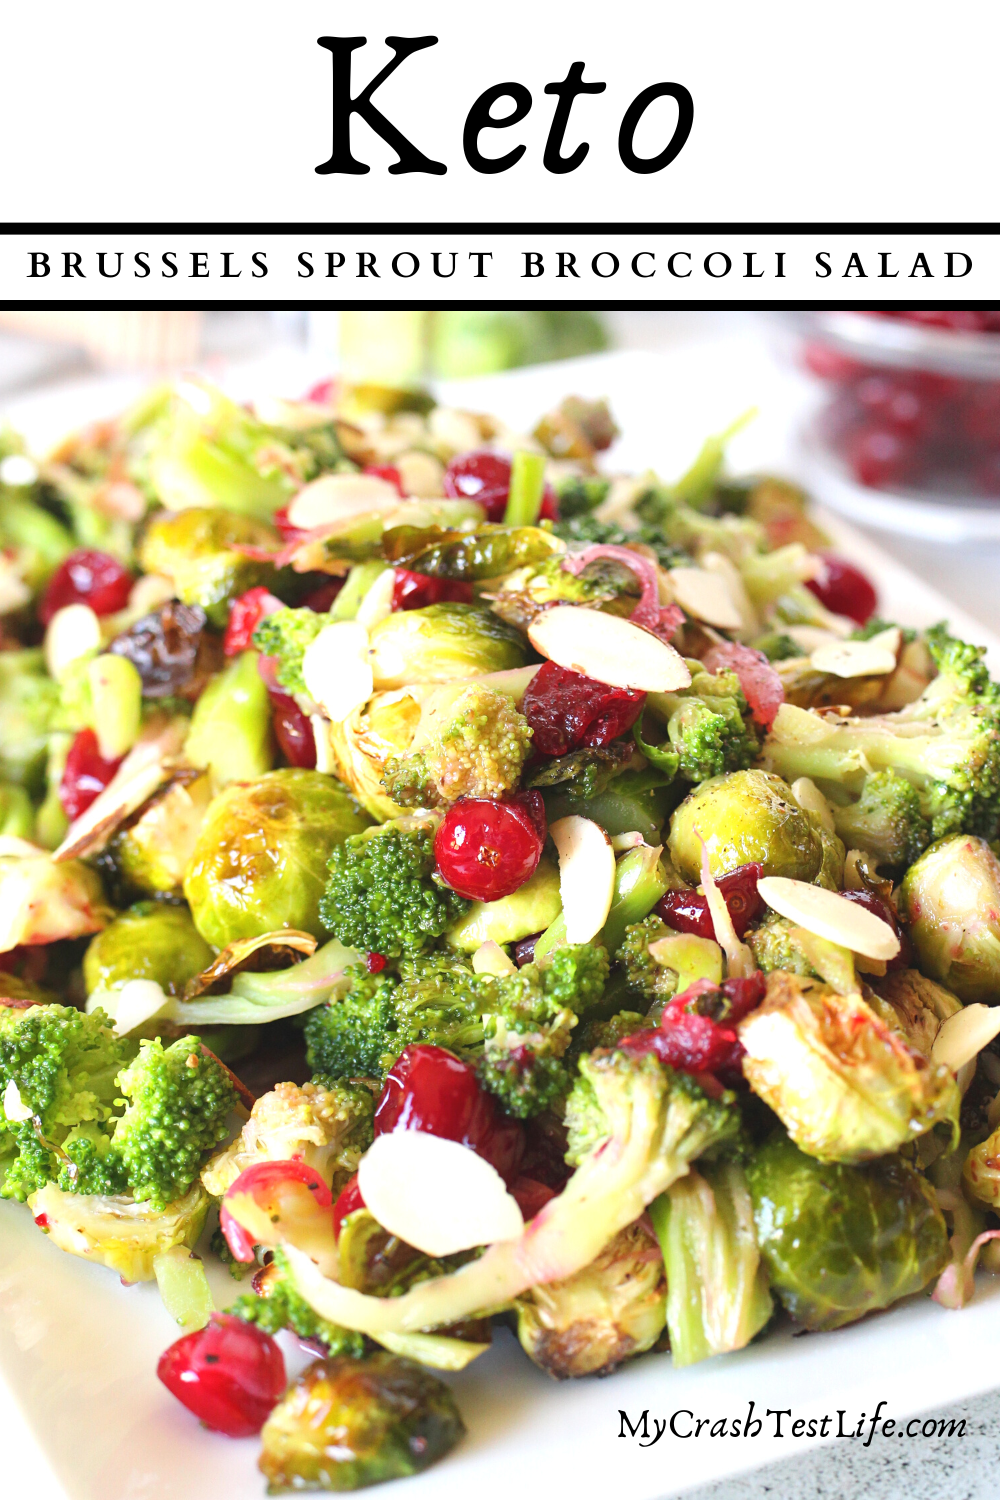 healthy keto plant-based vegan salad with roasted Brussels Sprouts and Broccoli tossed in a sweet cranberry vinaigrette